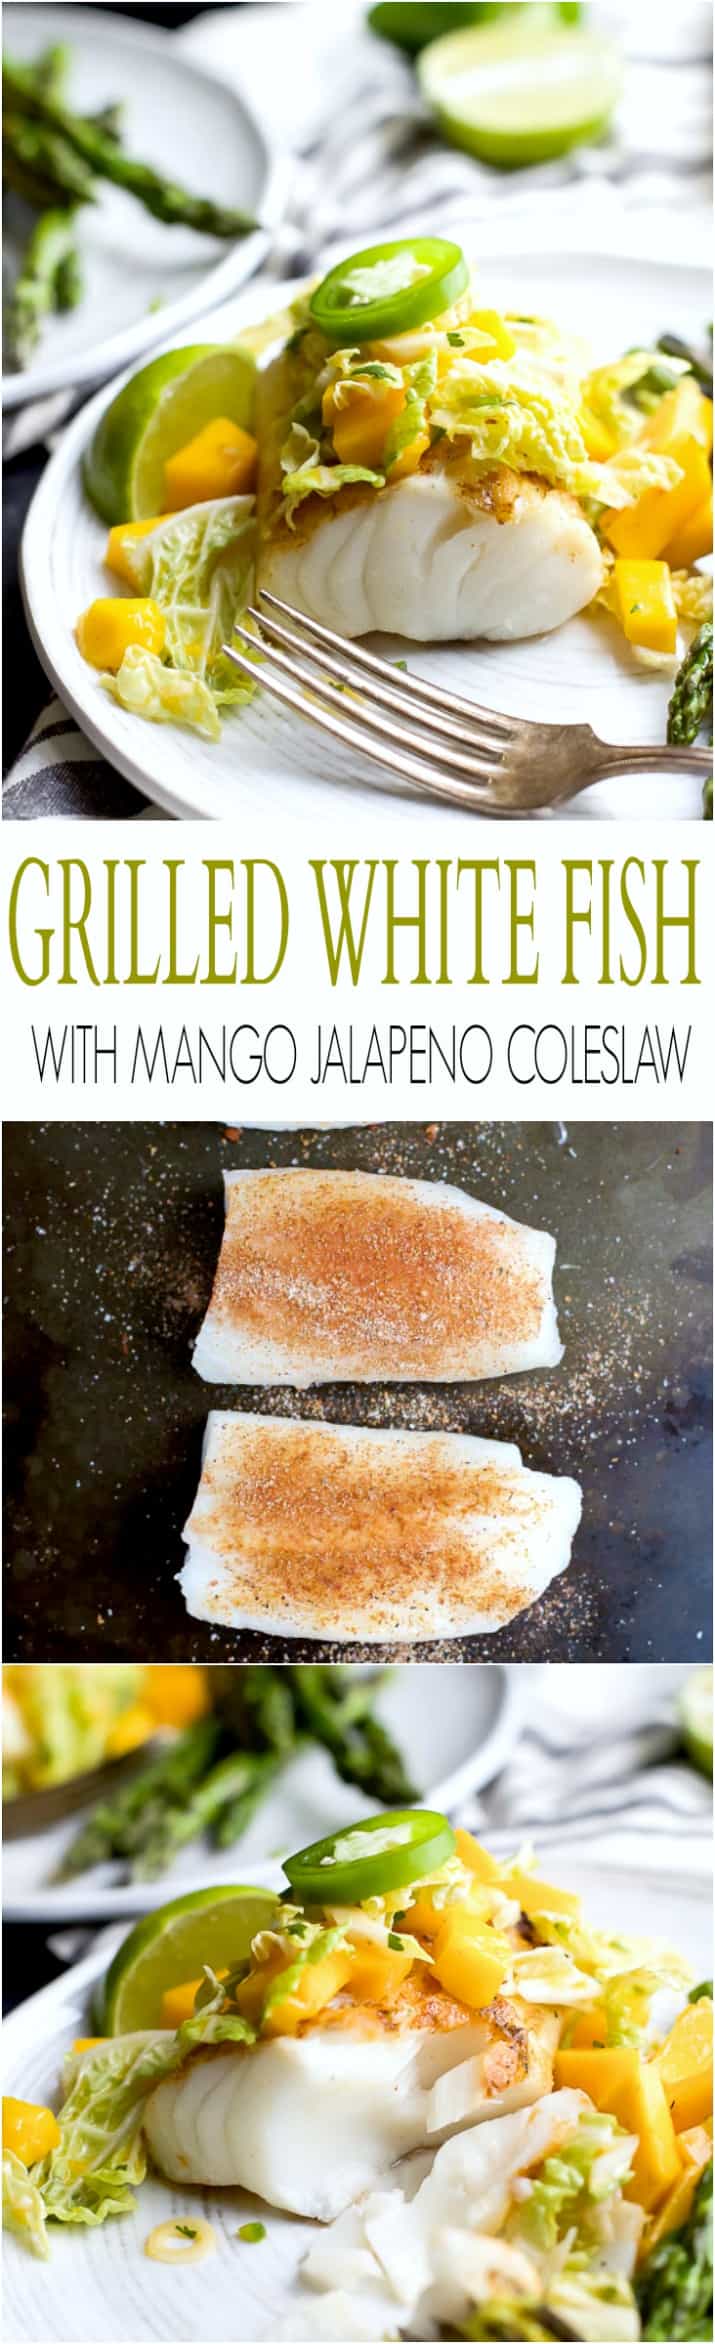 Recipe collage for Grilled White Fish with Mango Jalapeno Coleslaw